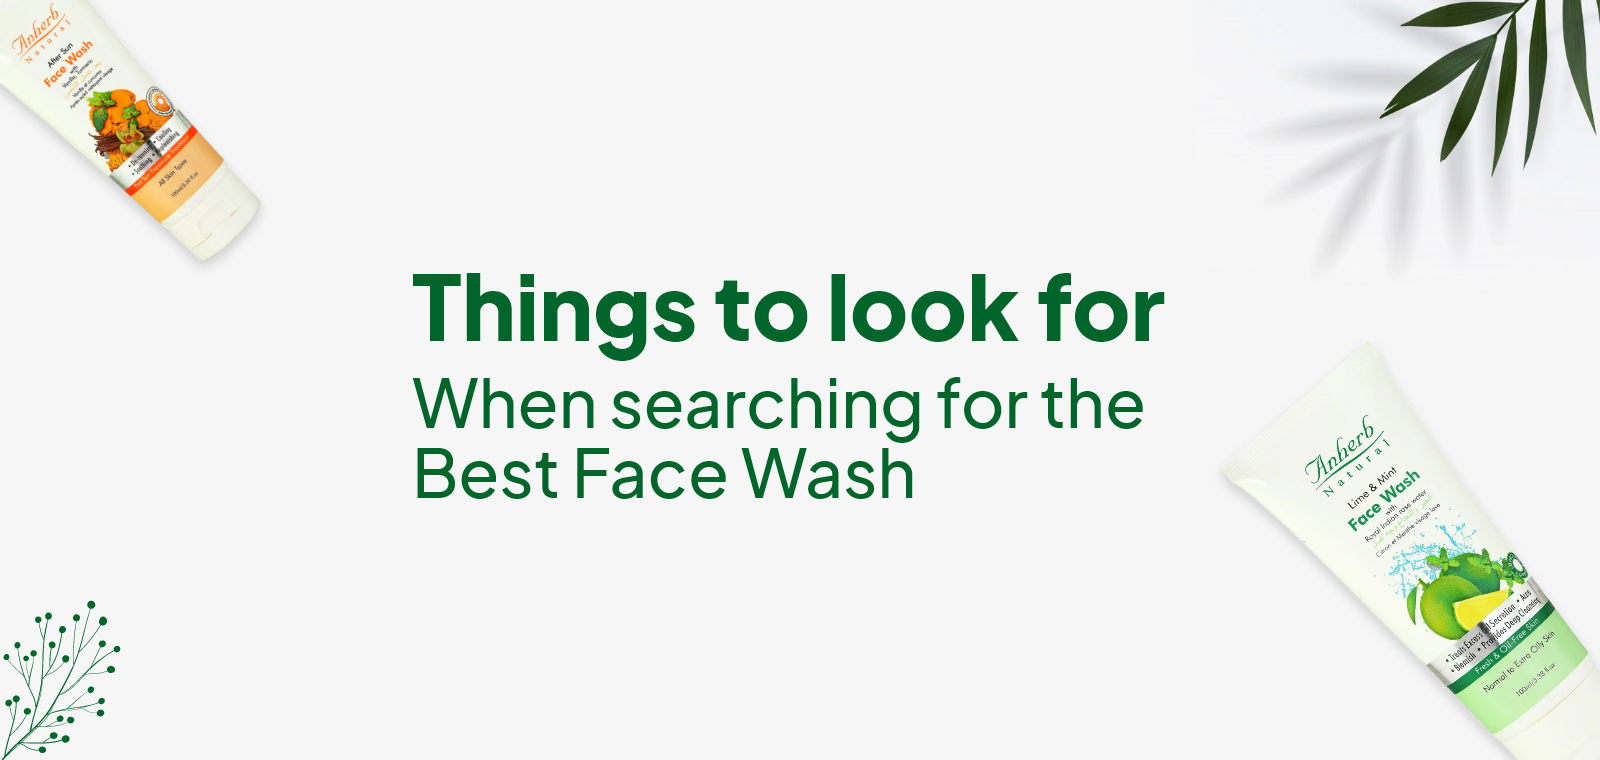 Things to look for when searching for the best face wash